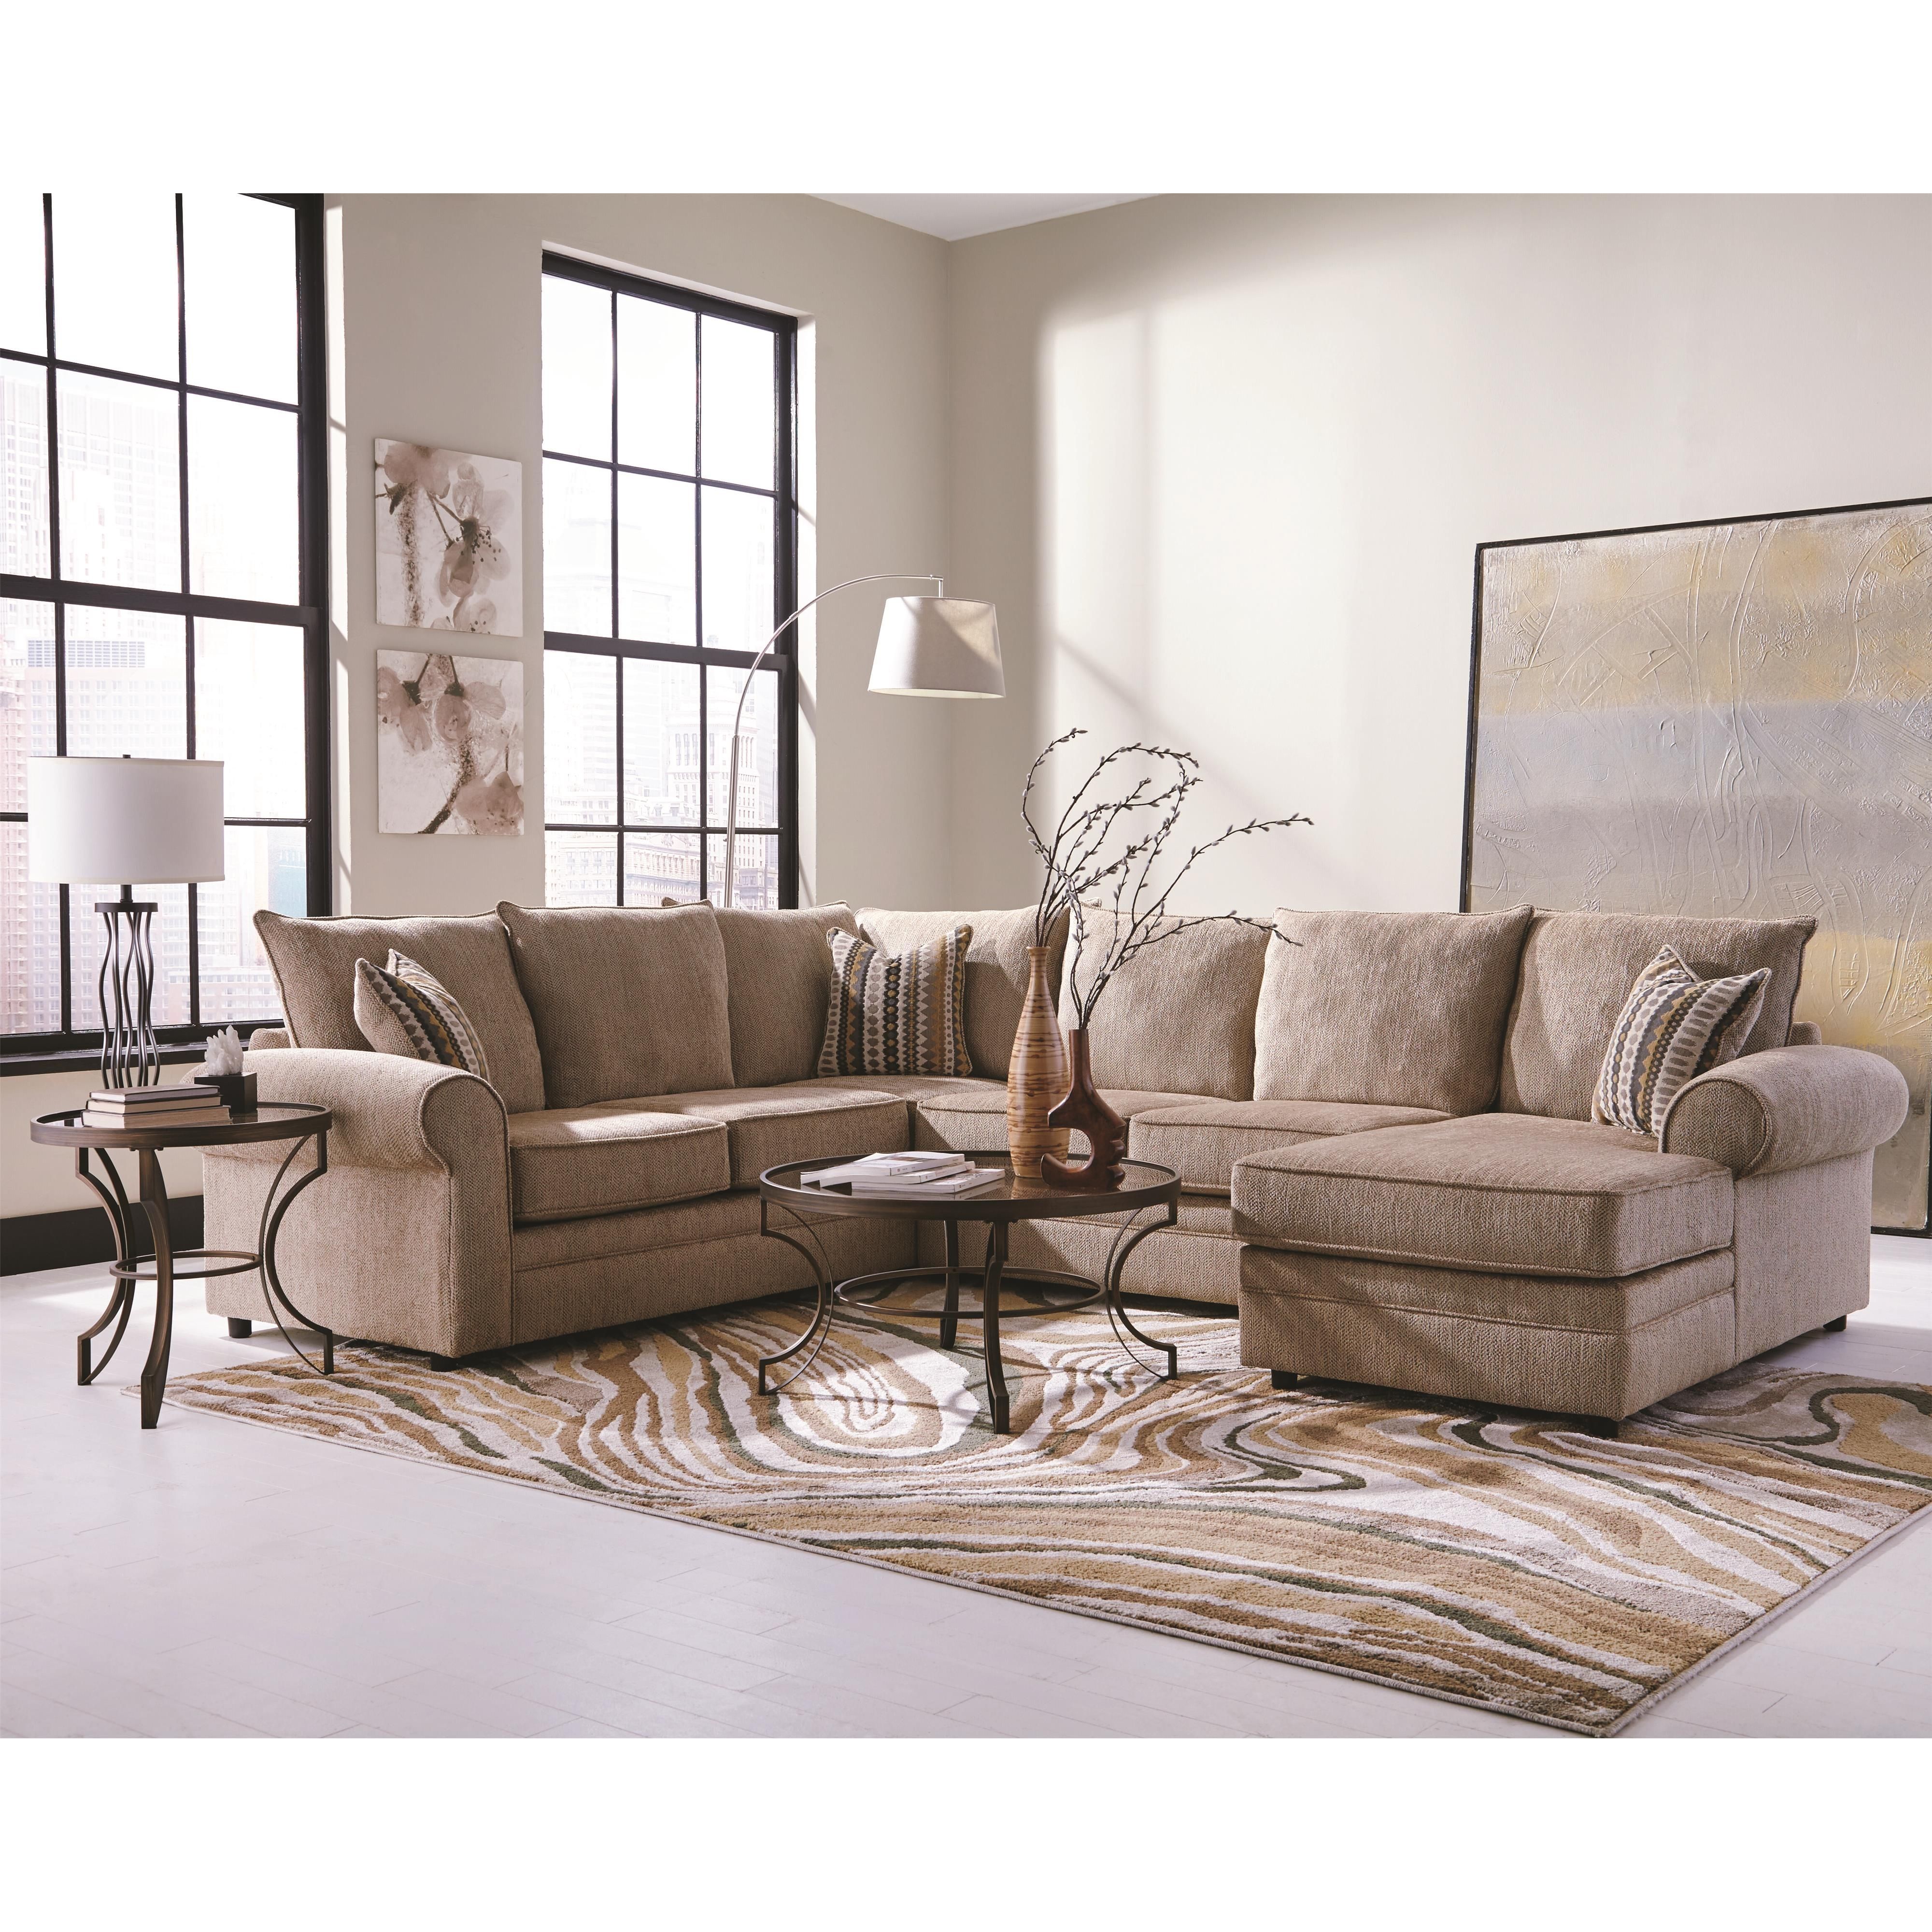 Fairhaven Cream Colored U Shaped Sectional With Chaise | Quality Inside Philadelphia Sectional Sofas (Photo 5 of 10)